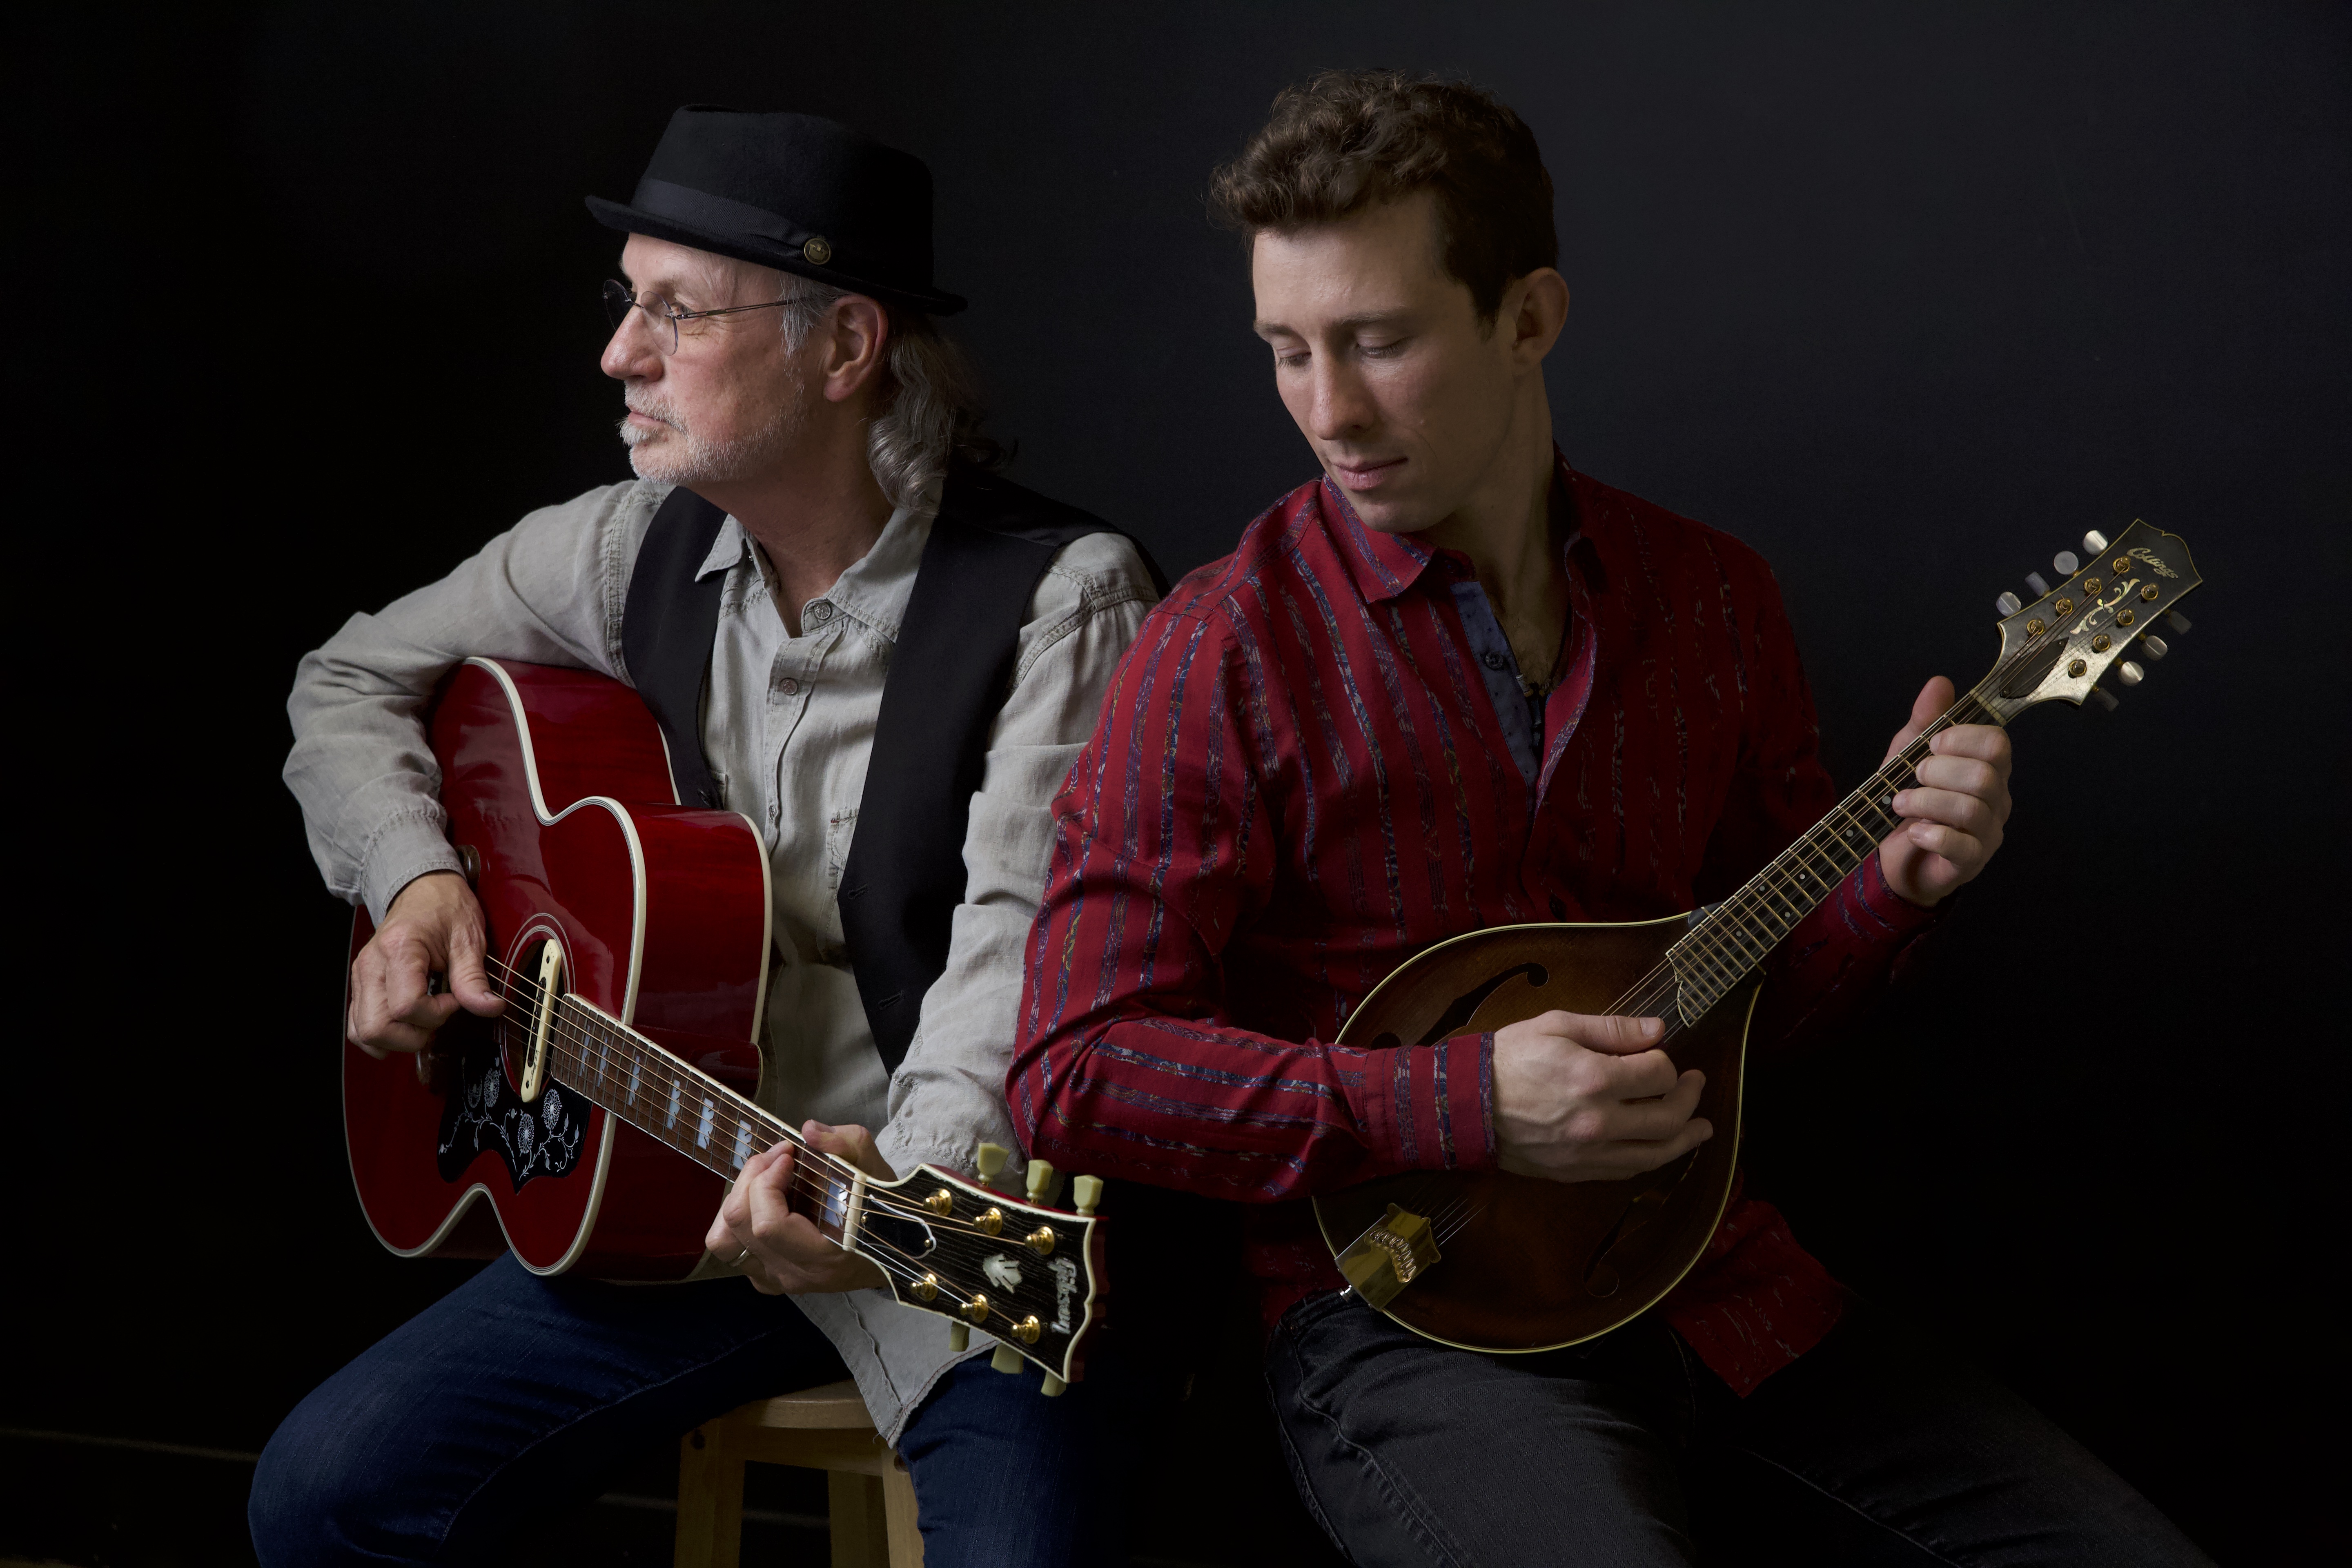 David Starr and Erik Stucky Light Up the Stage with 'Waiting In The Dark' and UK Tour